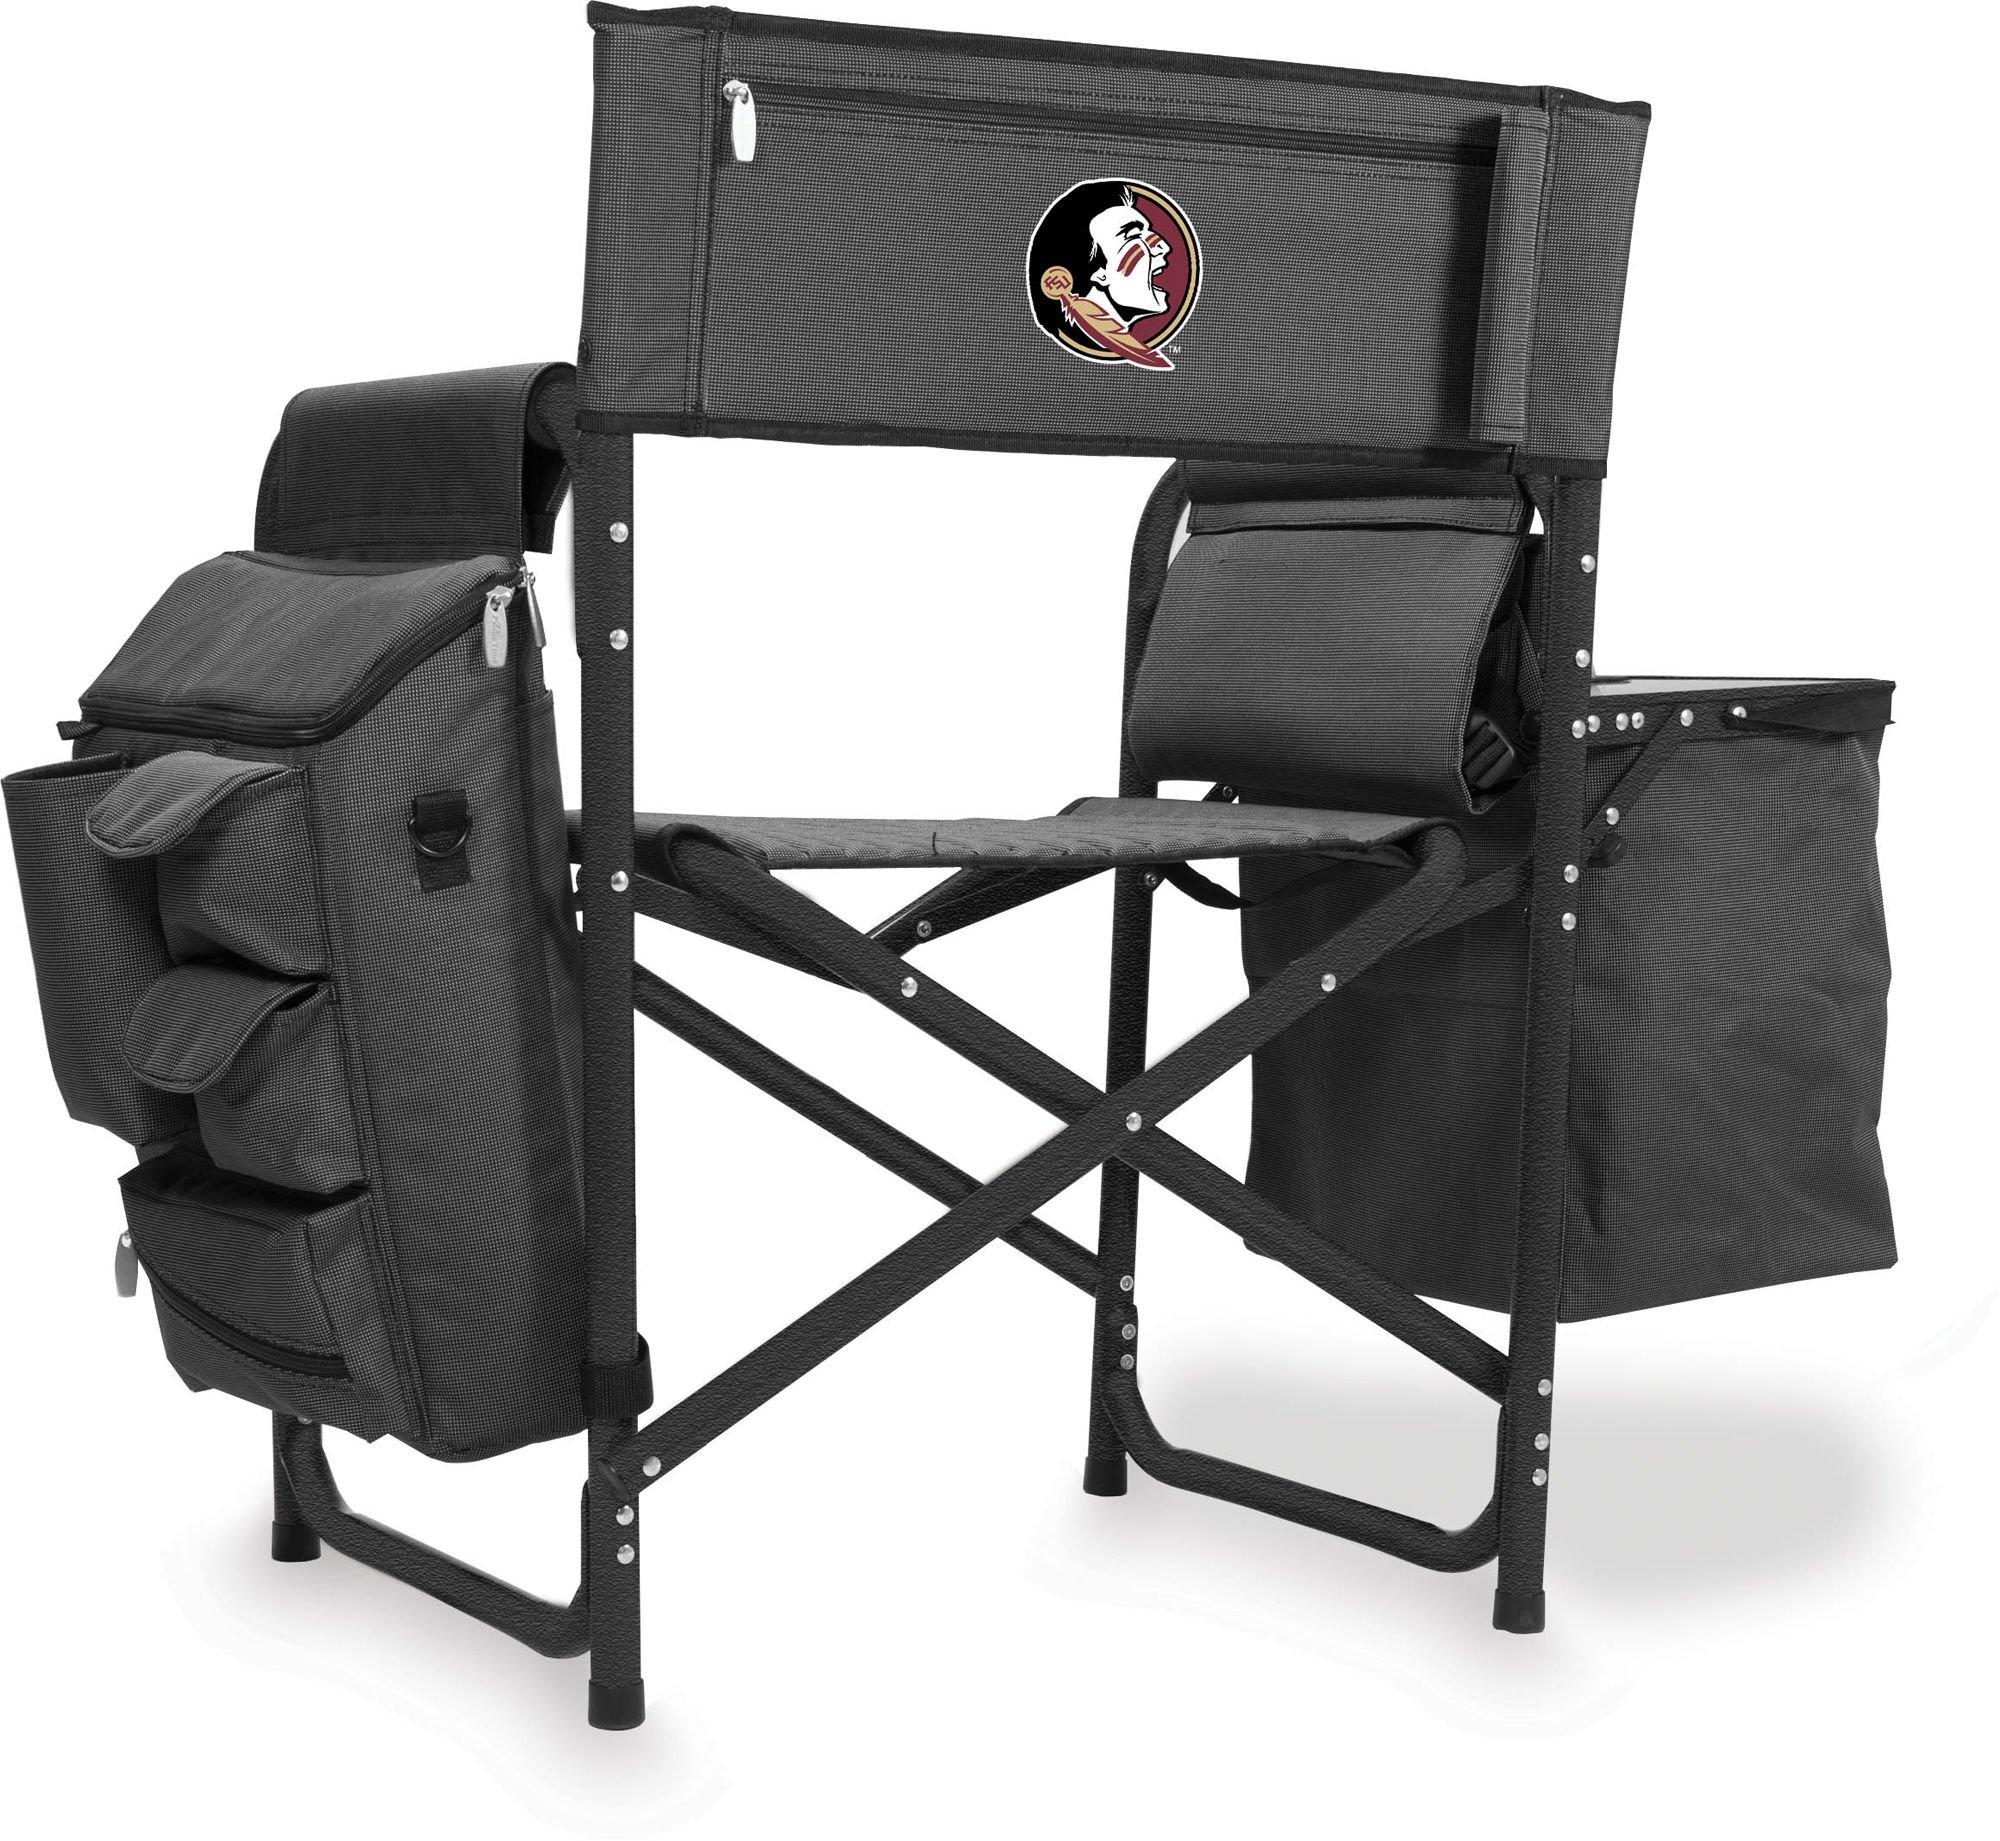 Florida State Fusion Chair